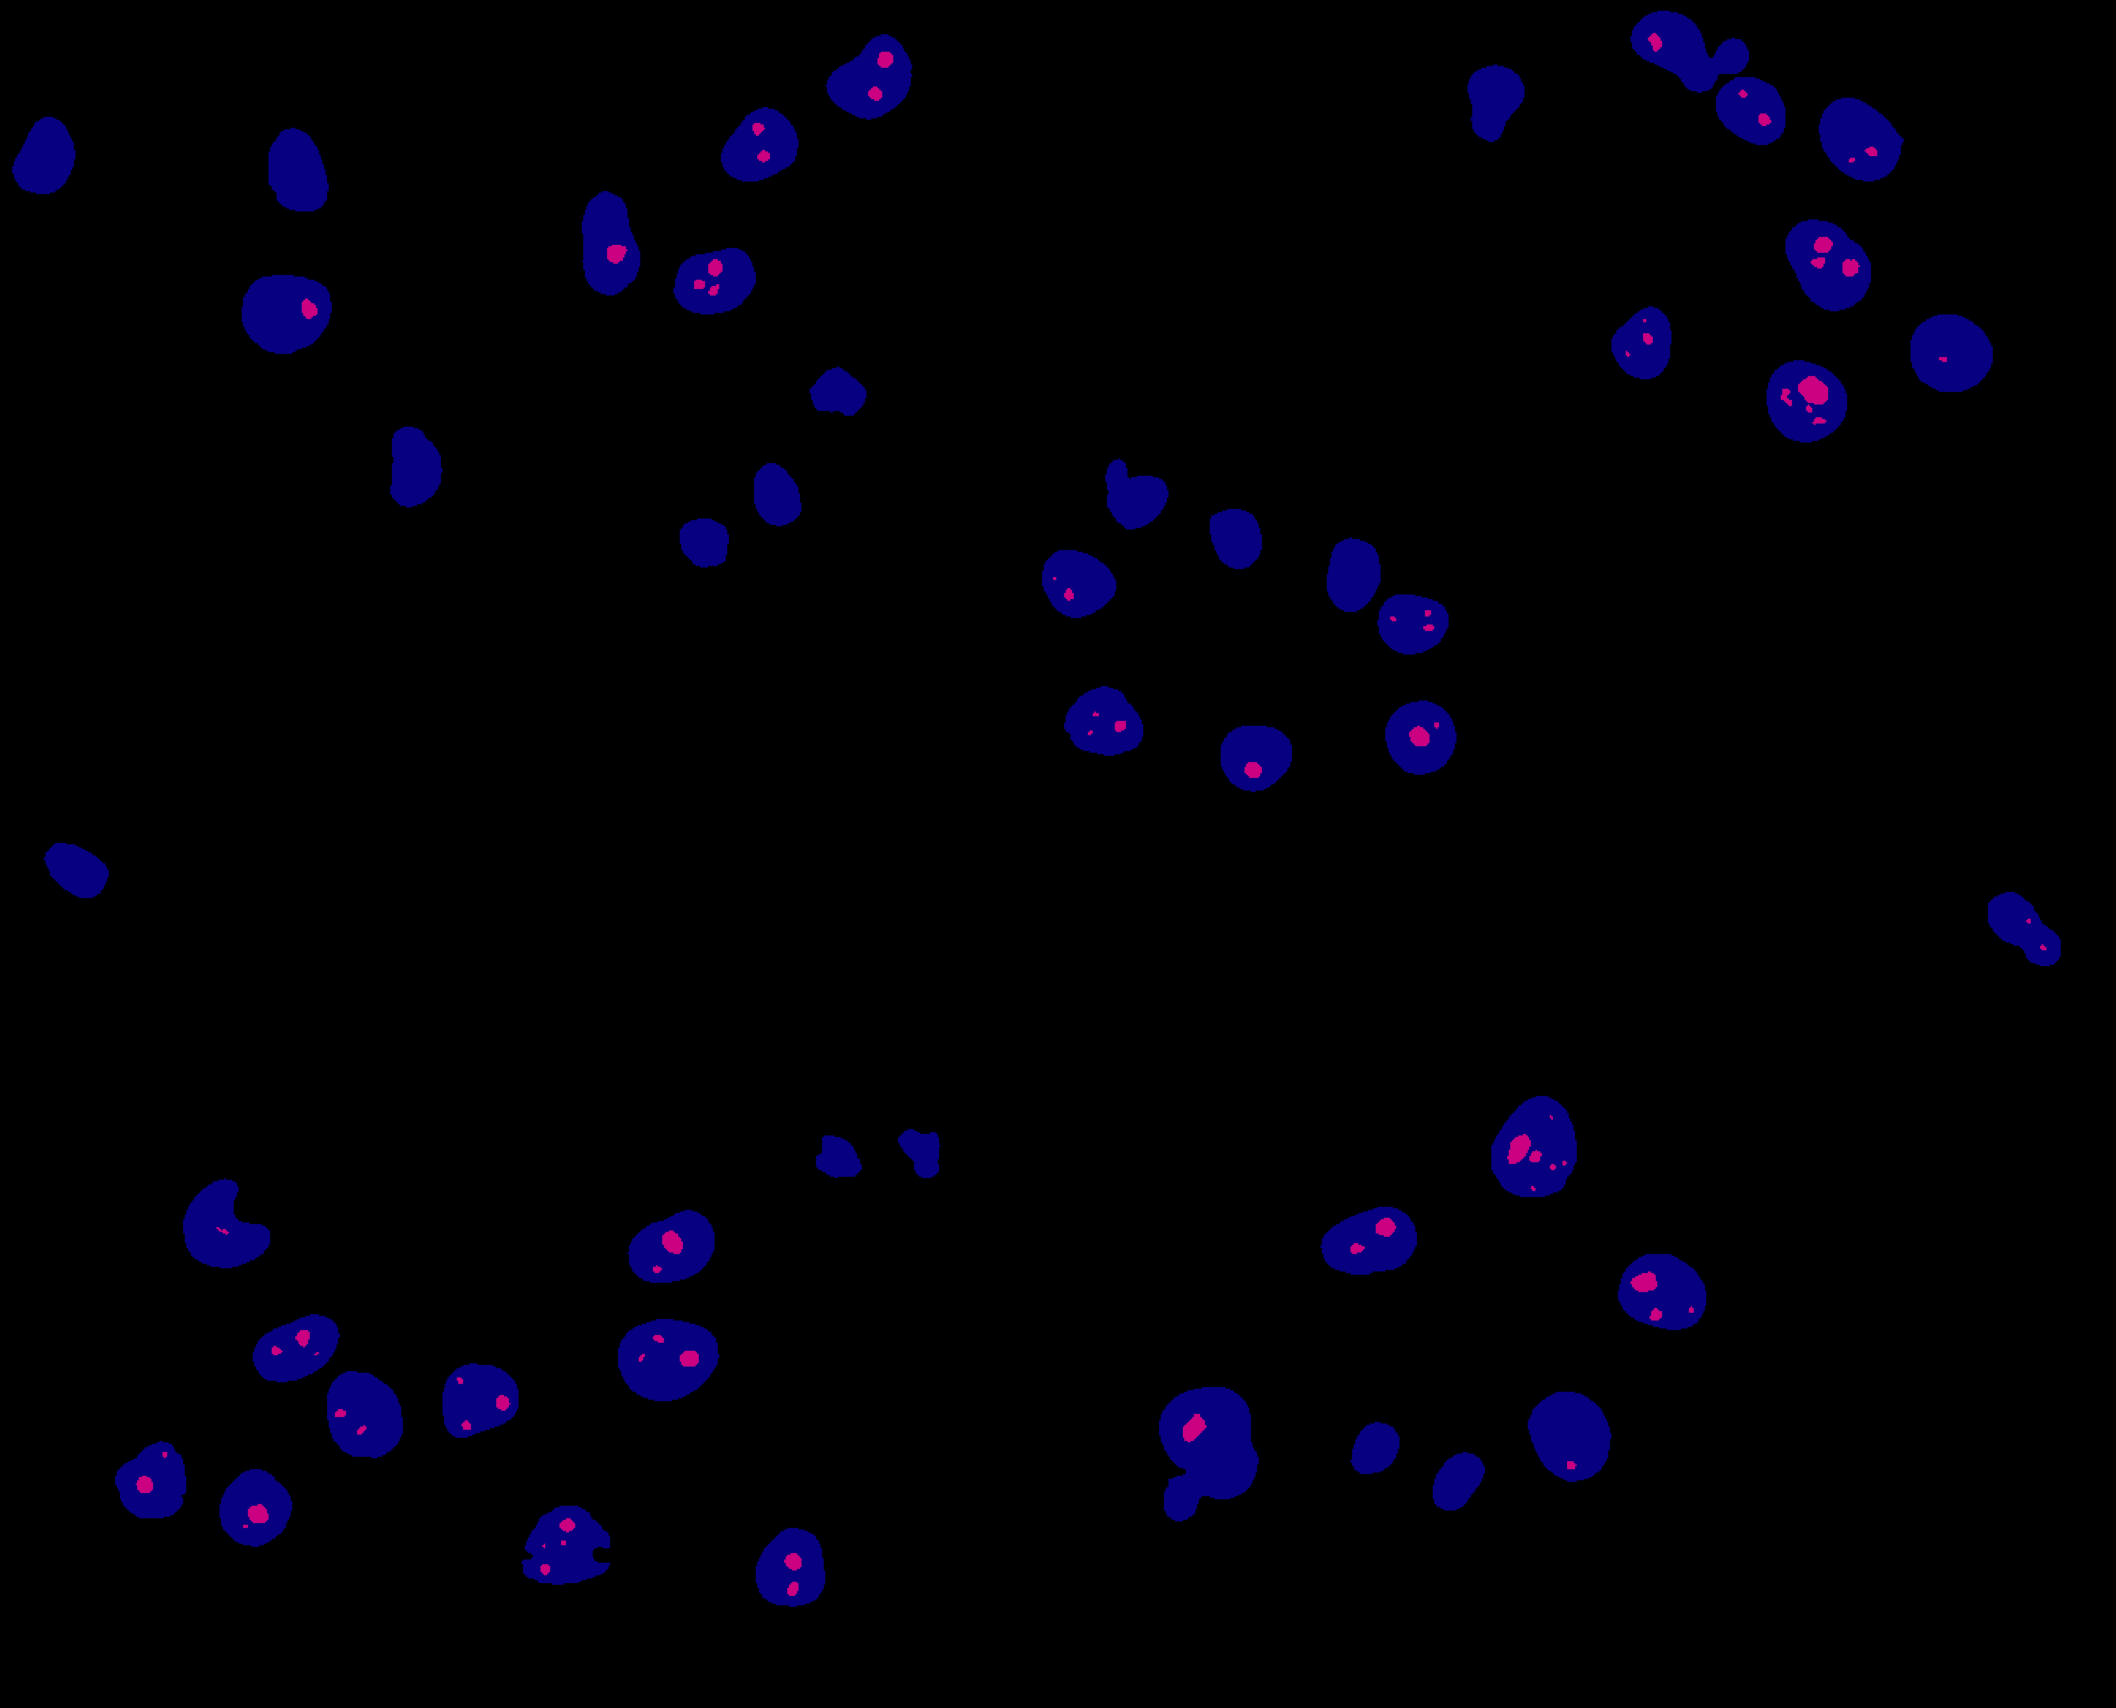 image of the cells again, but now cells are blue and nuclei/nucleoli are red.